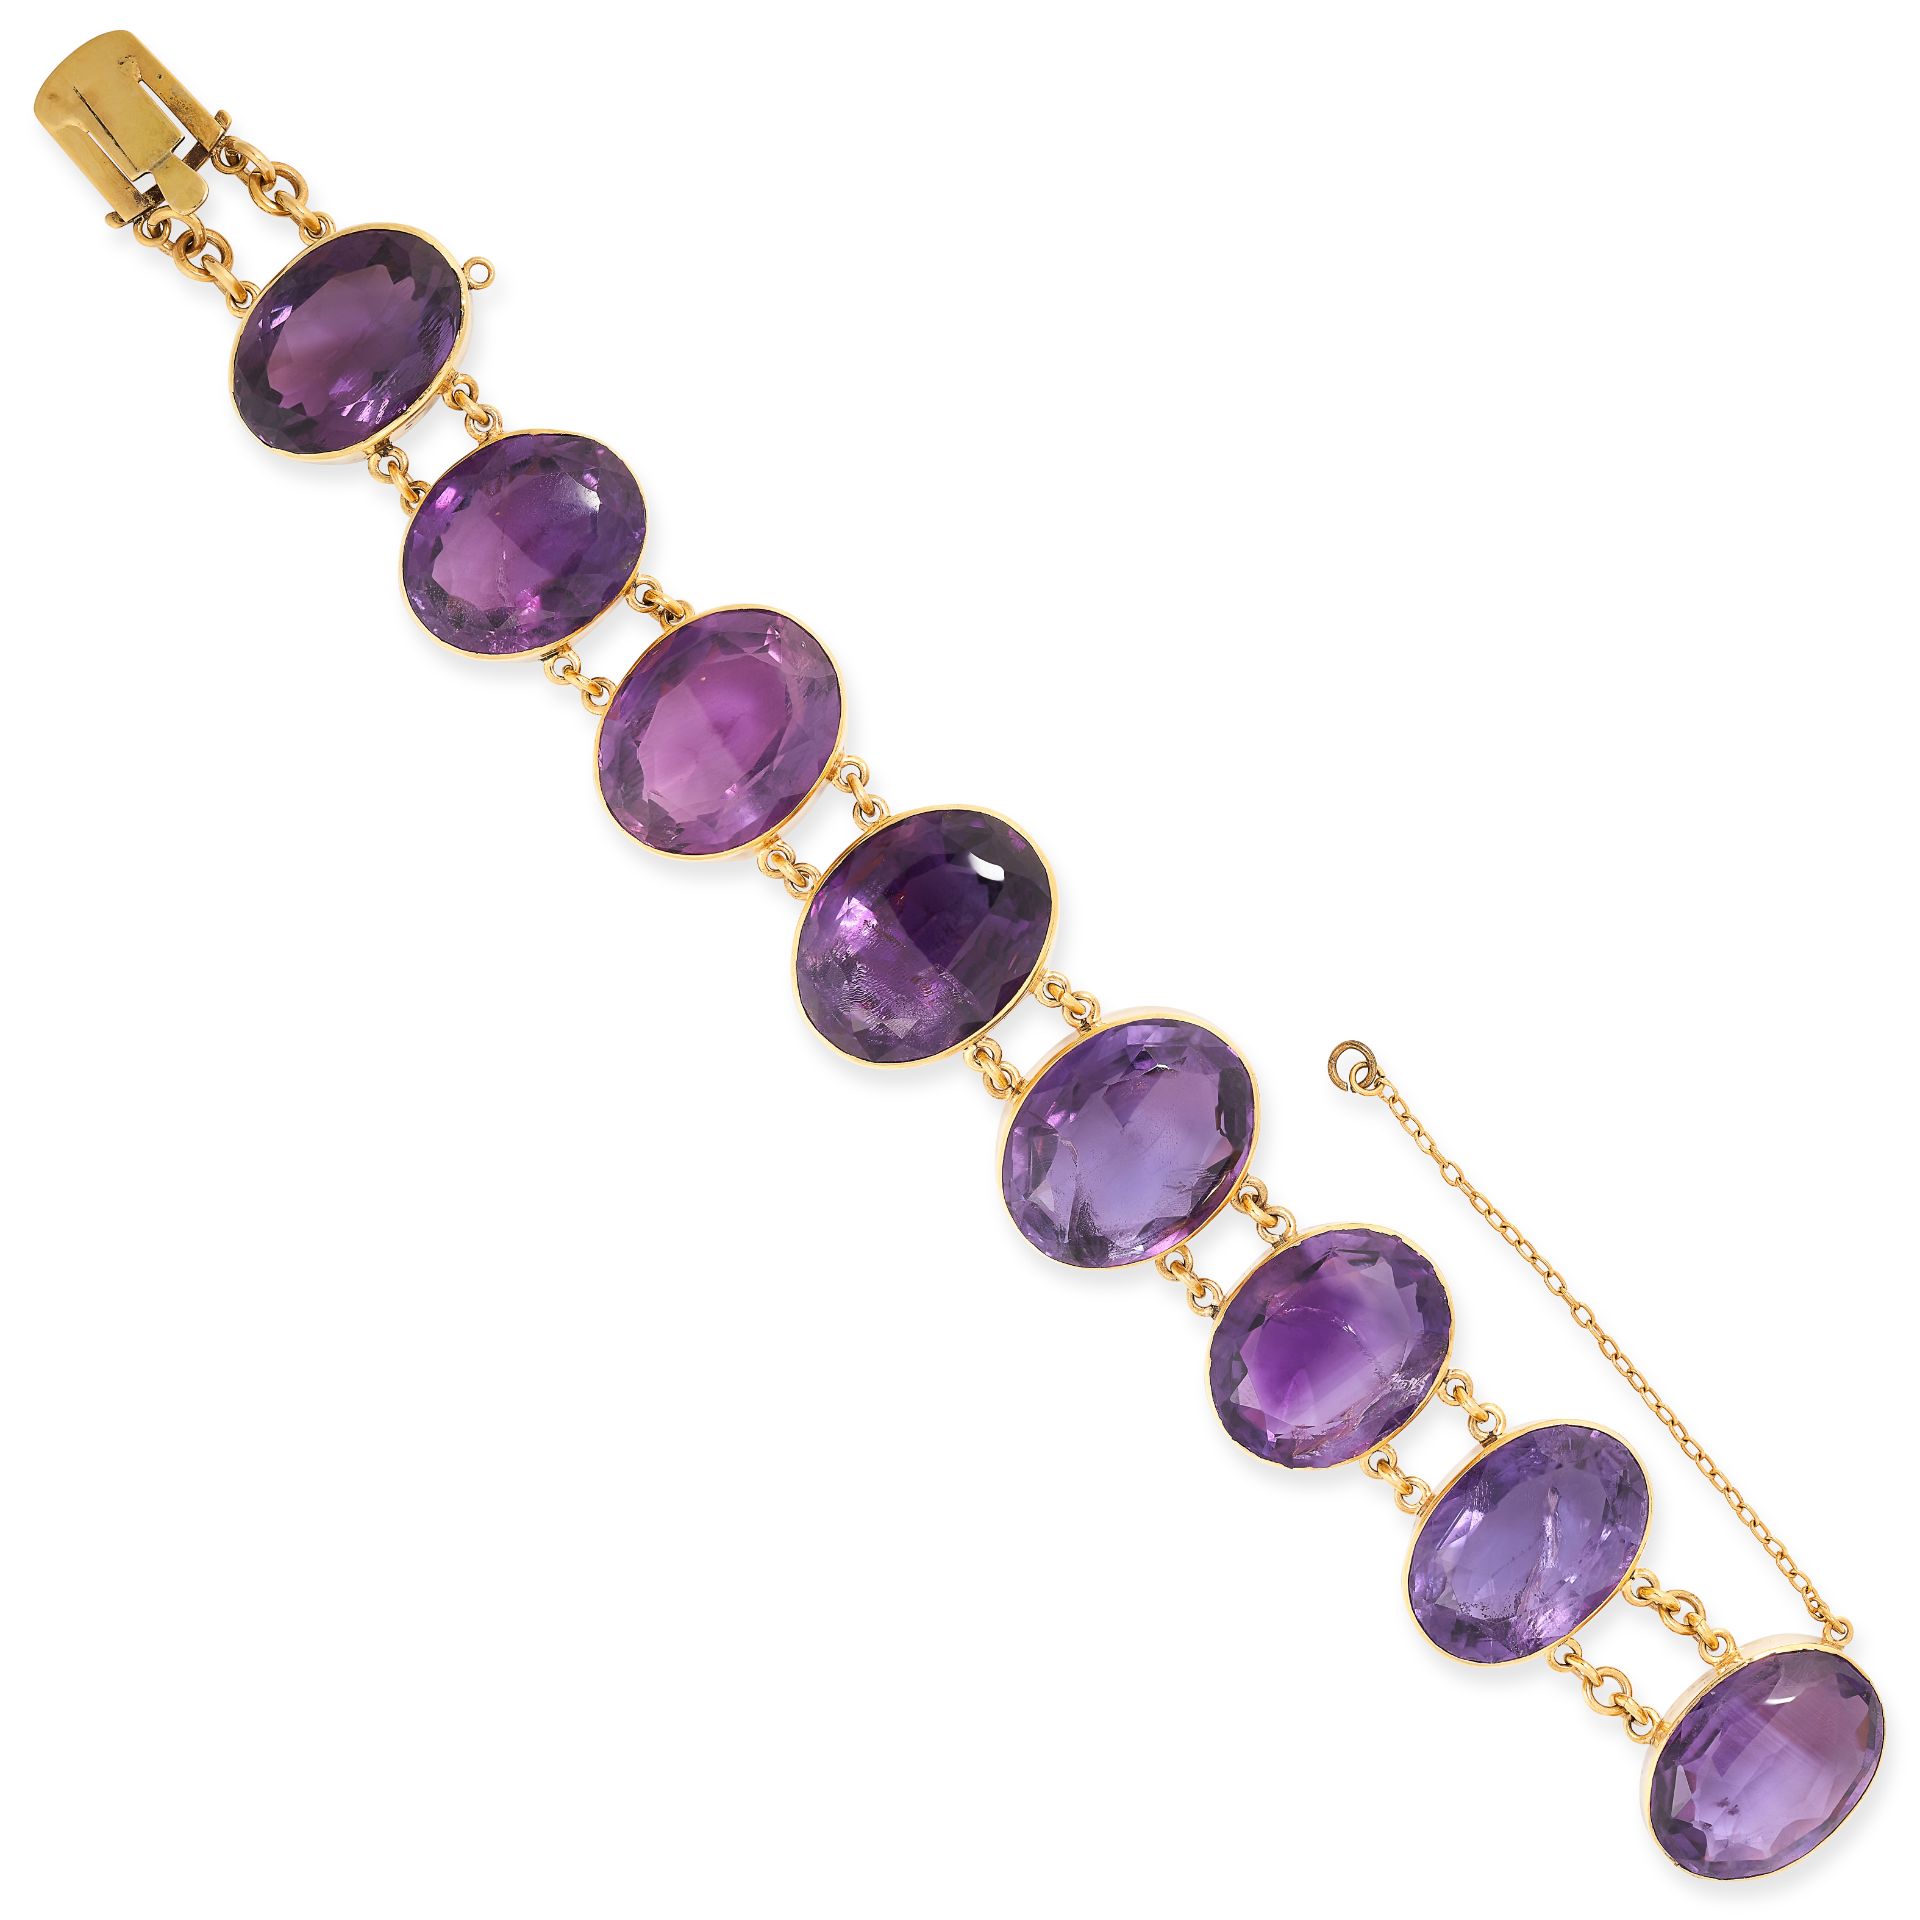 AN AMETHYST BRACELET set with eight oval cut amethysts between double chain links, no assay marks,